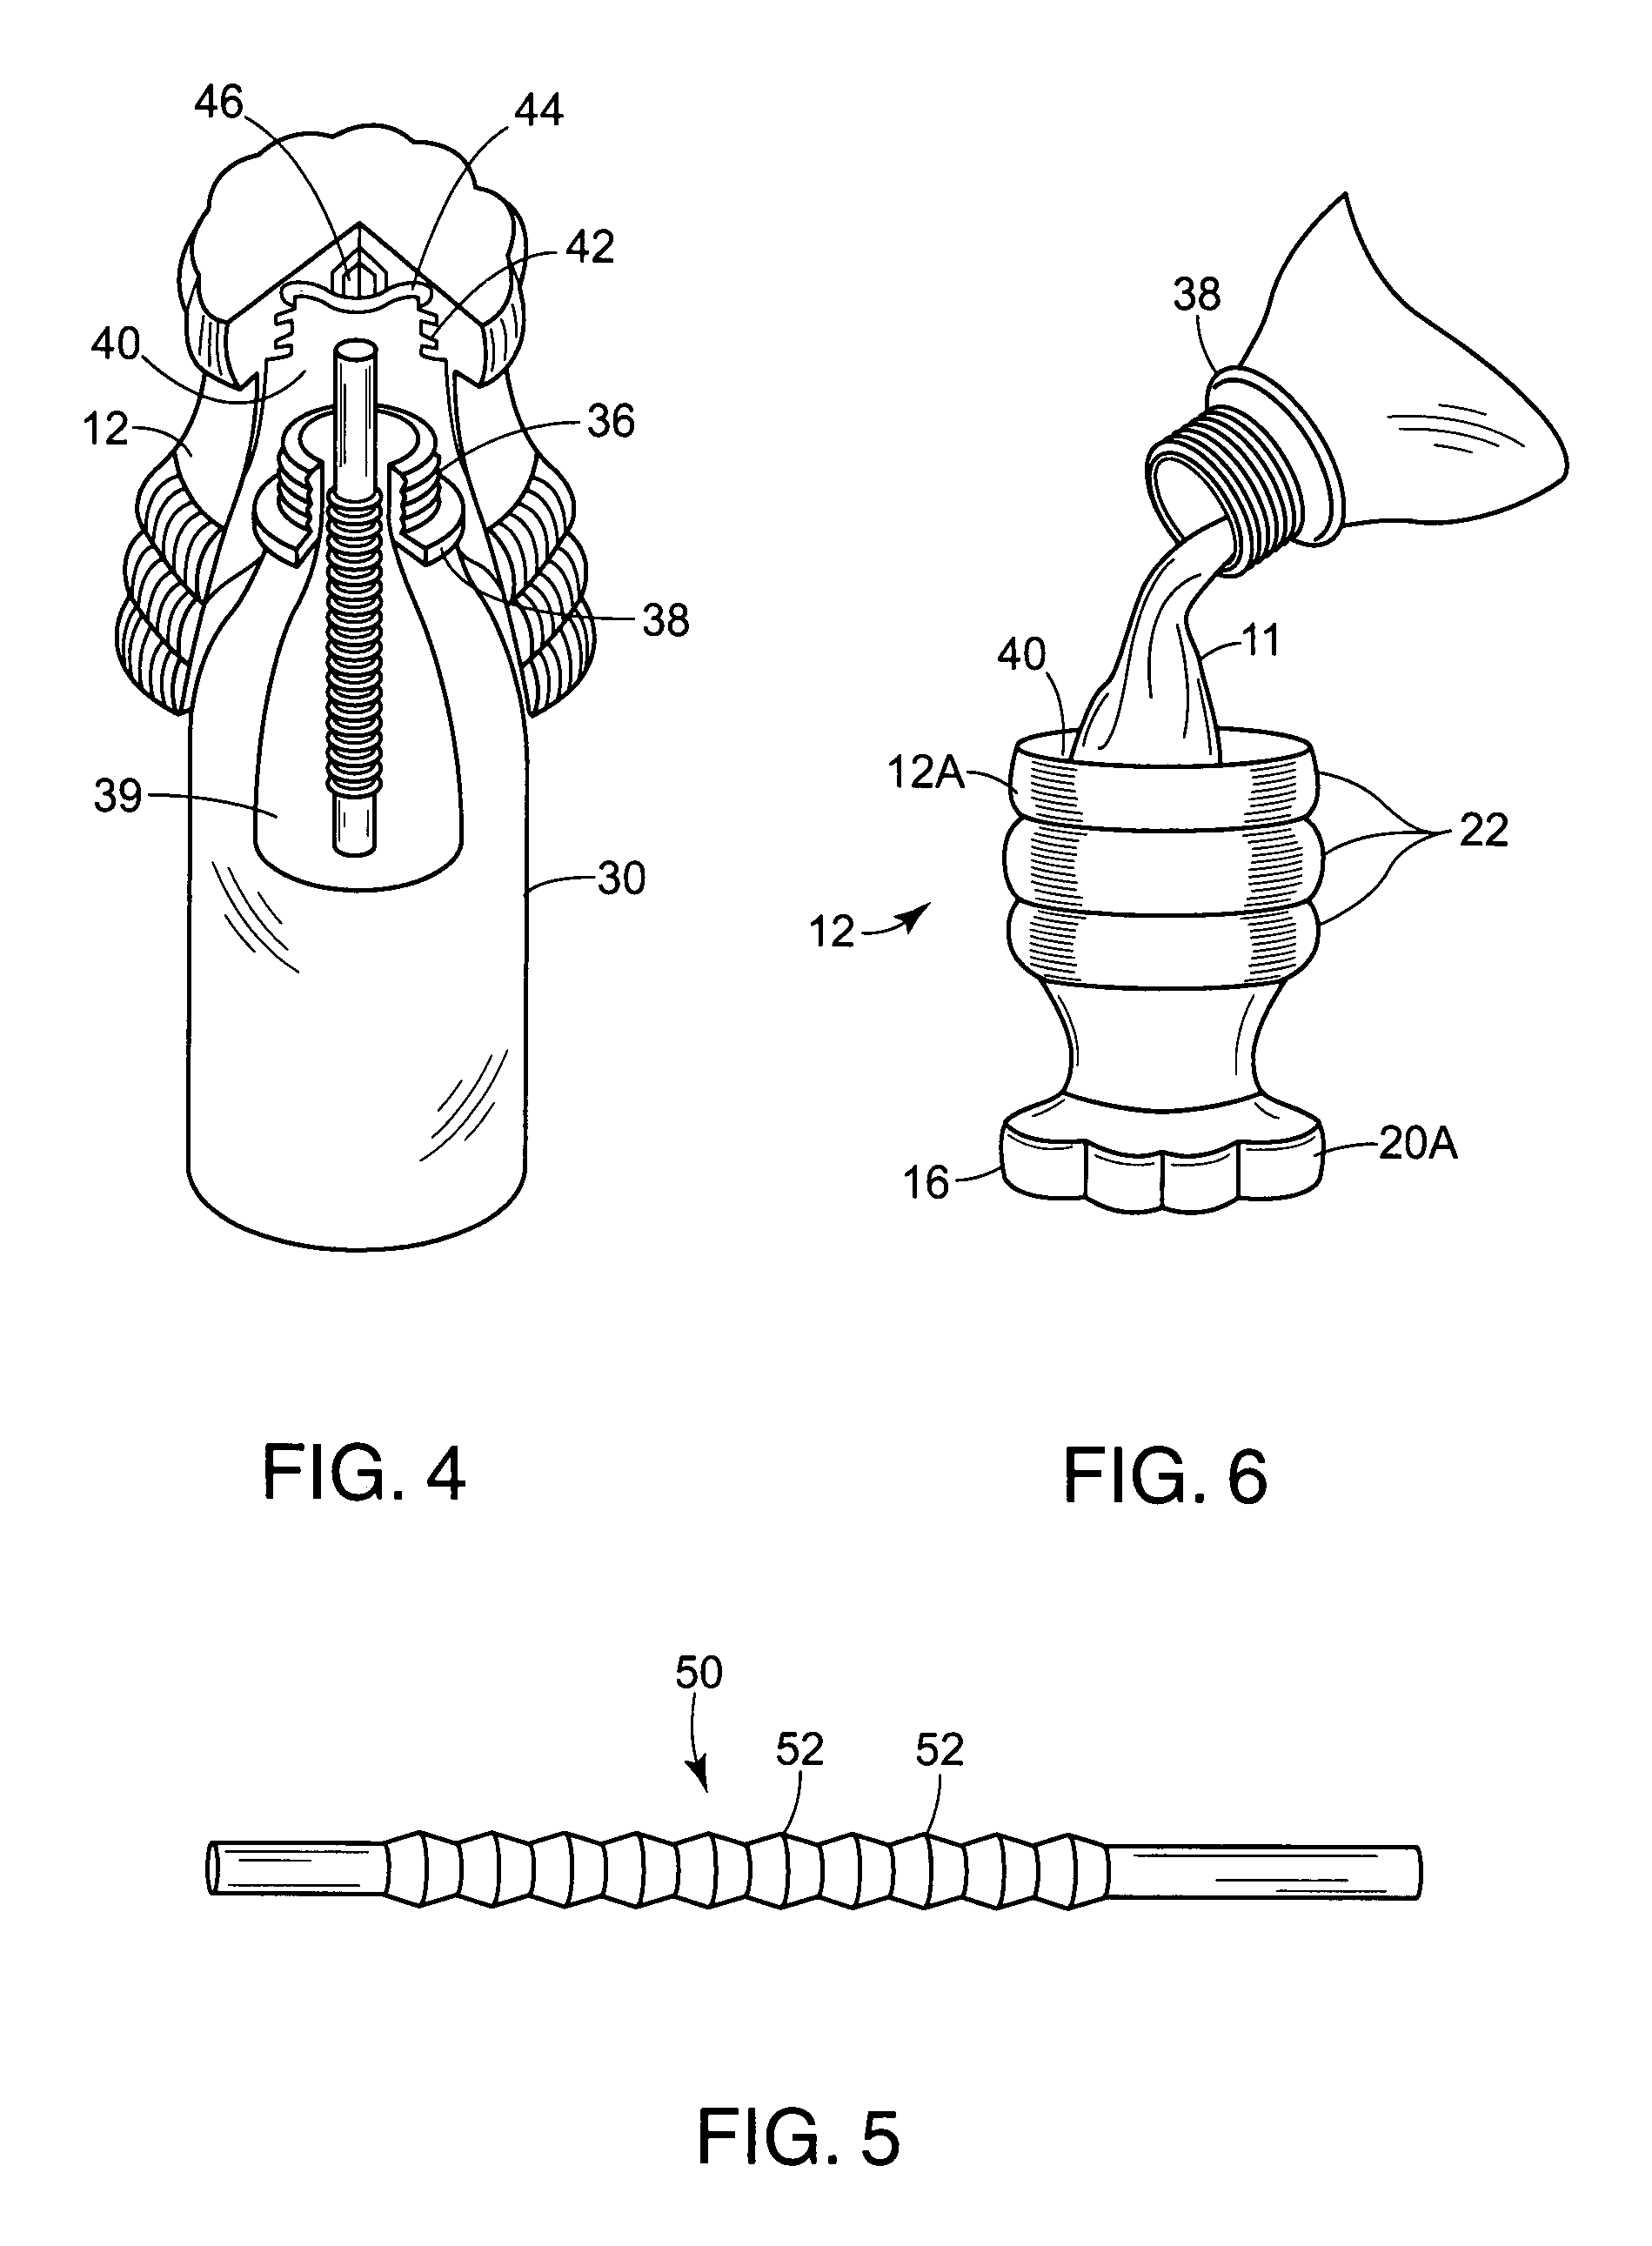 Combination closure-cup assembly